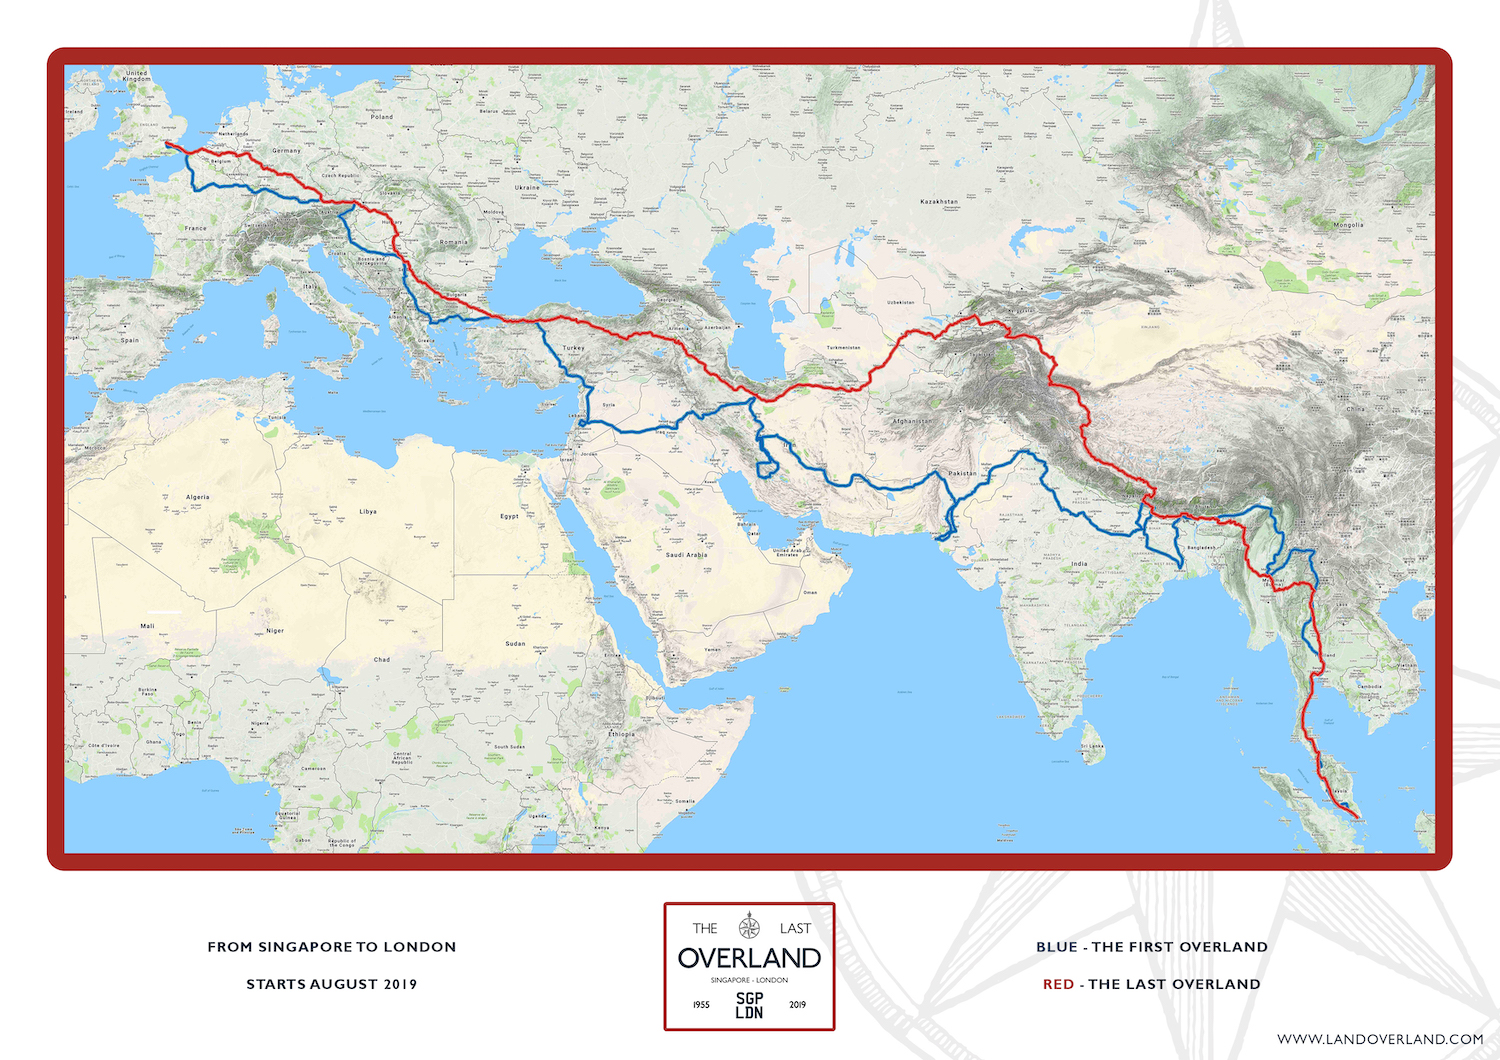 The Last Overland and First Overland Maps